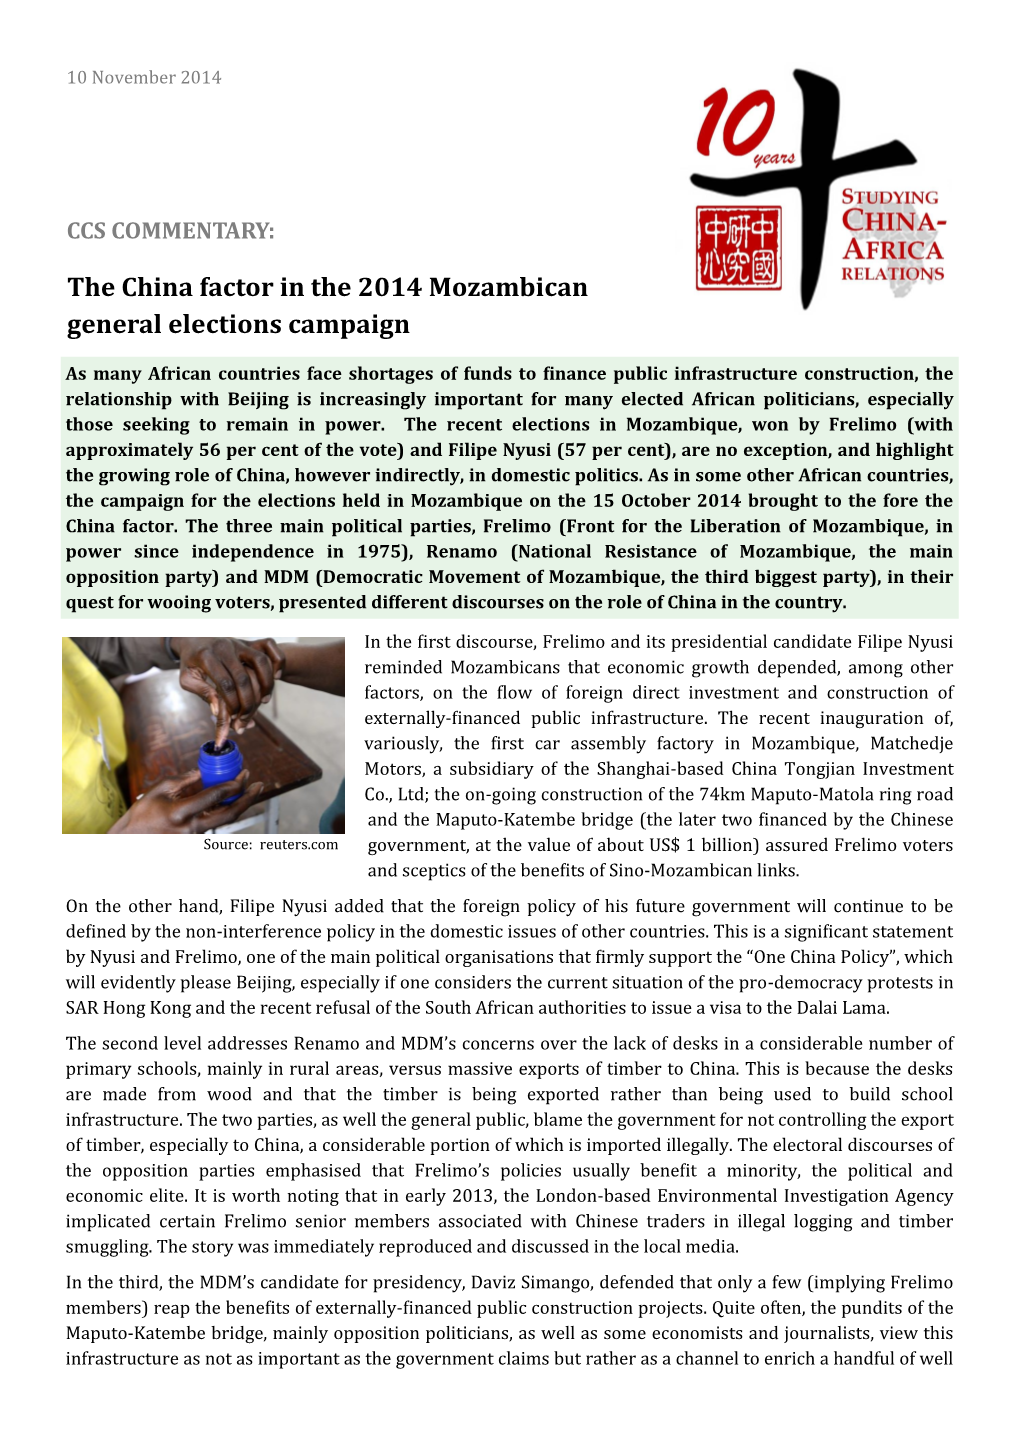 The China Factor in the 2014 Mozambican General Elections Campaign